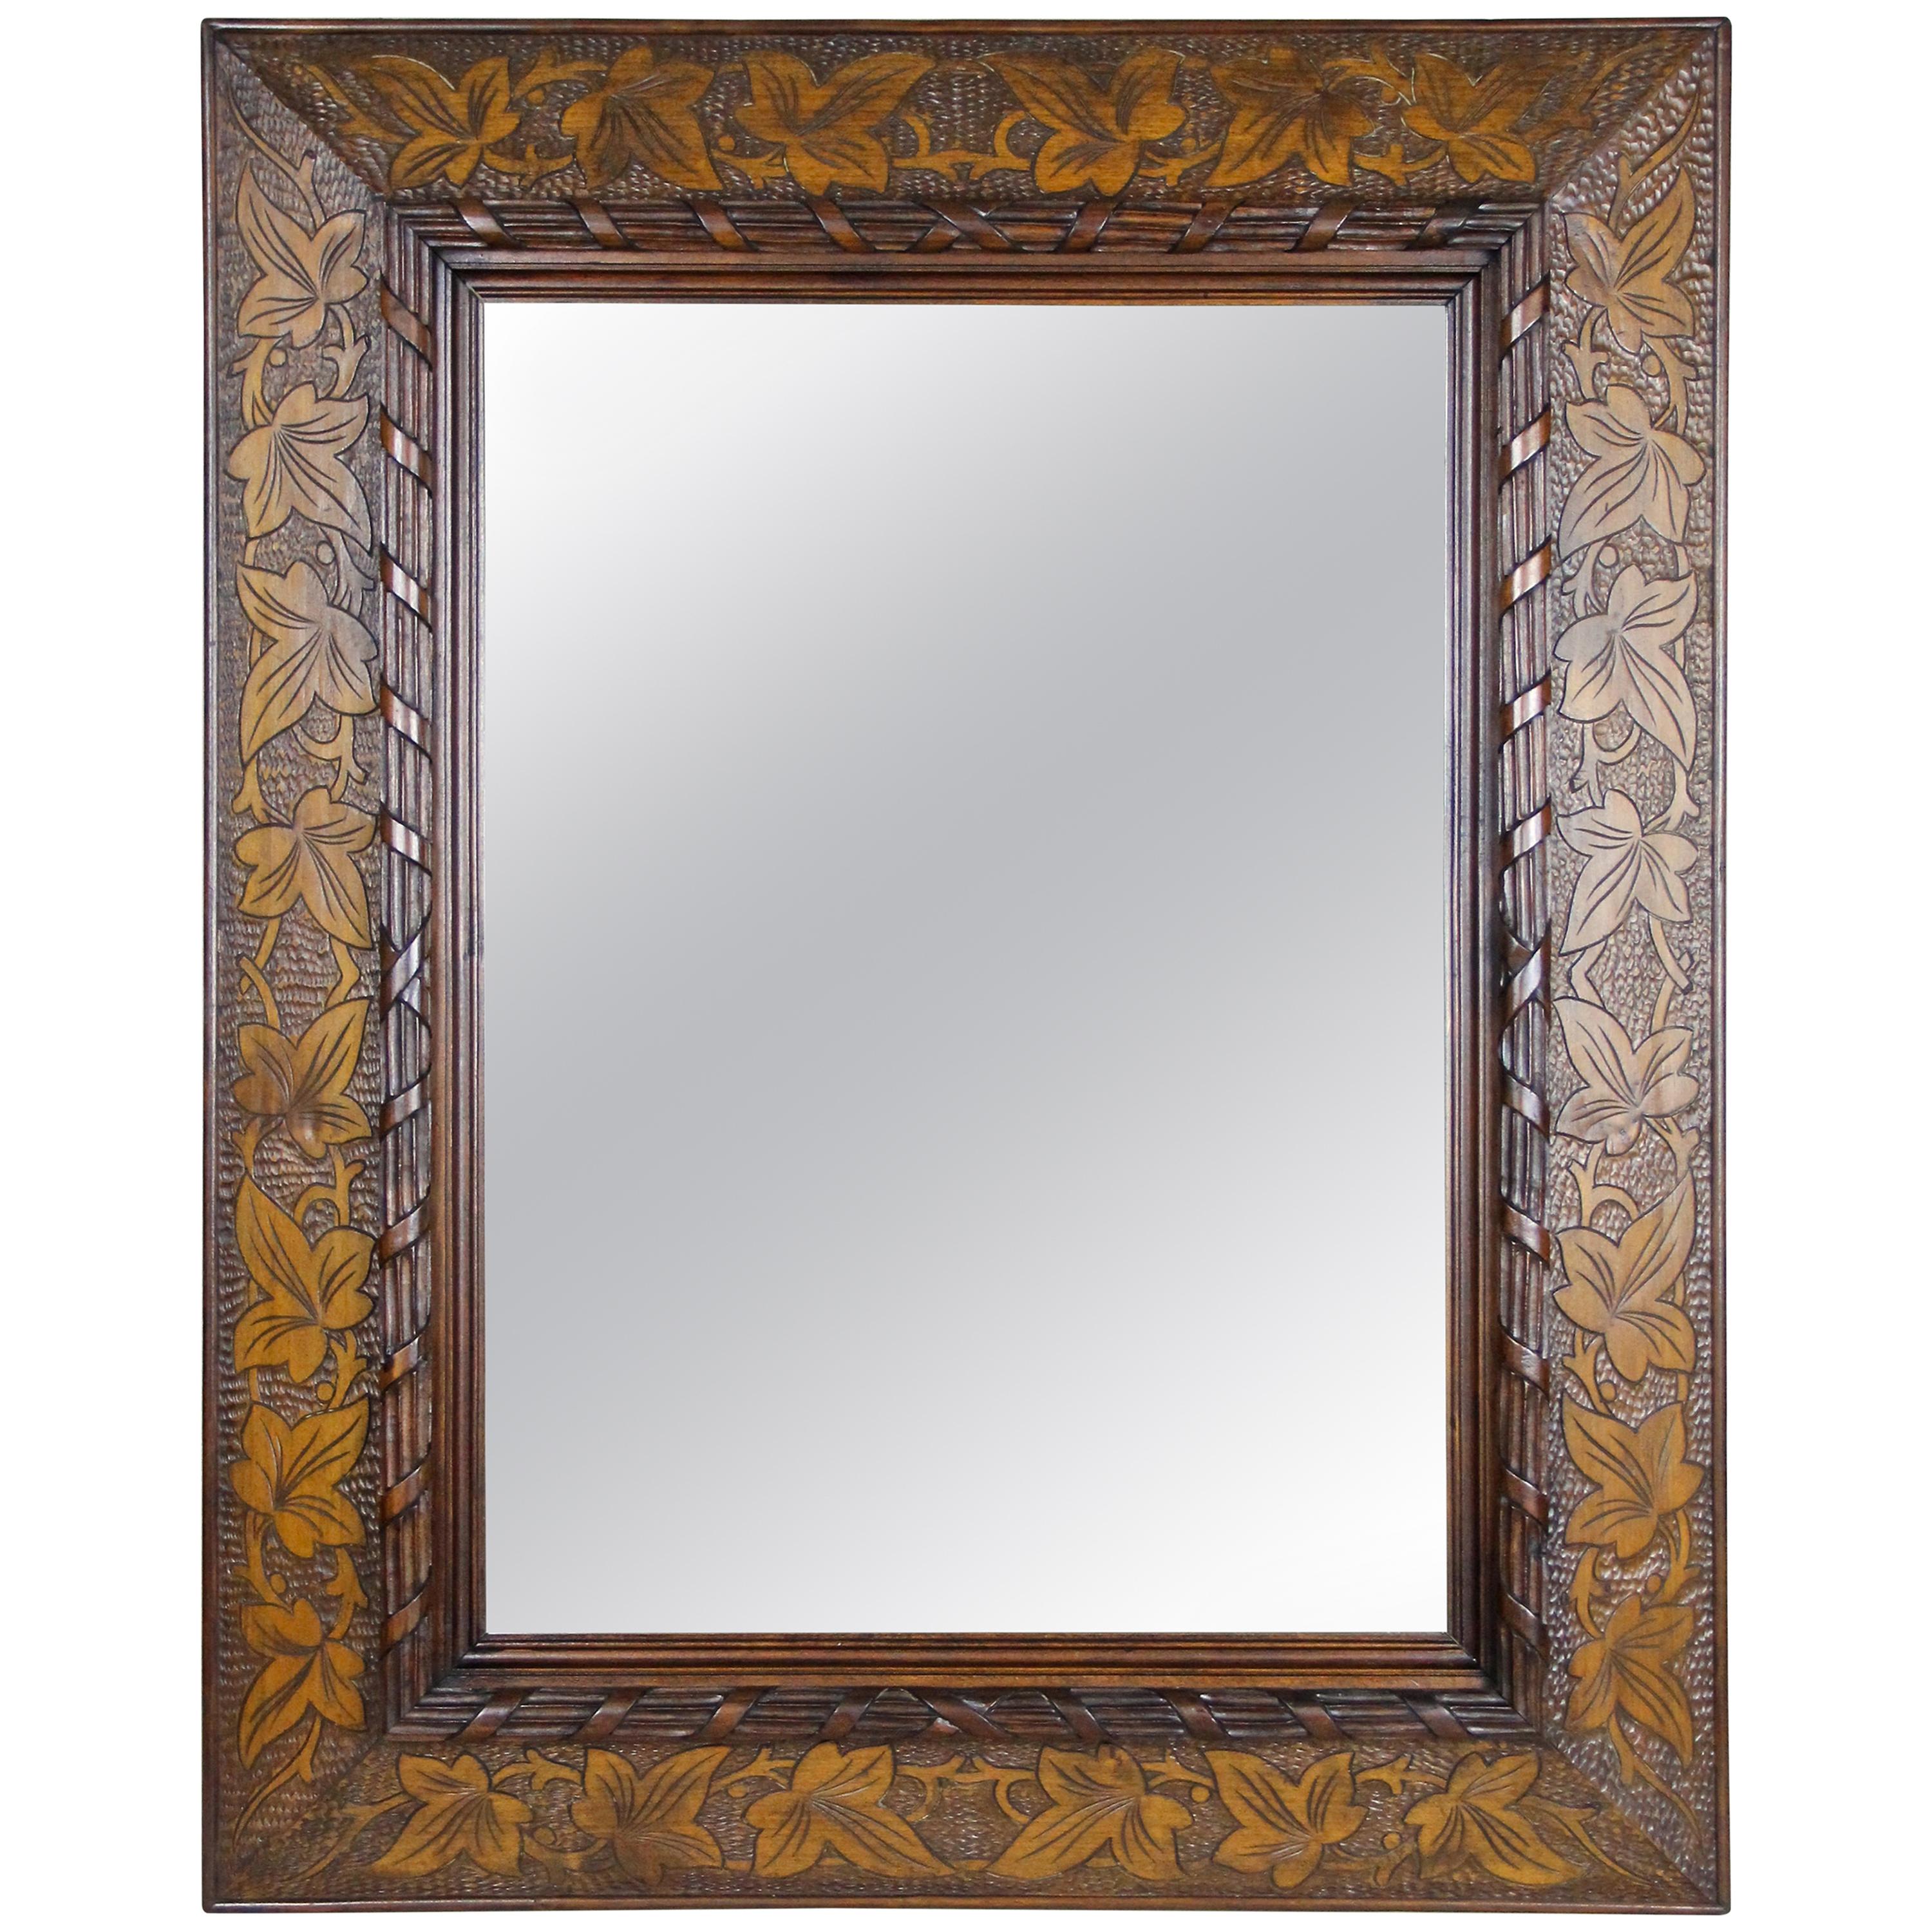 19th Century Wooden Wall Mirror with Ivy Leaf Carvings, Austria, circa 1890